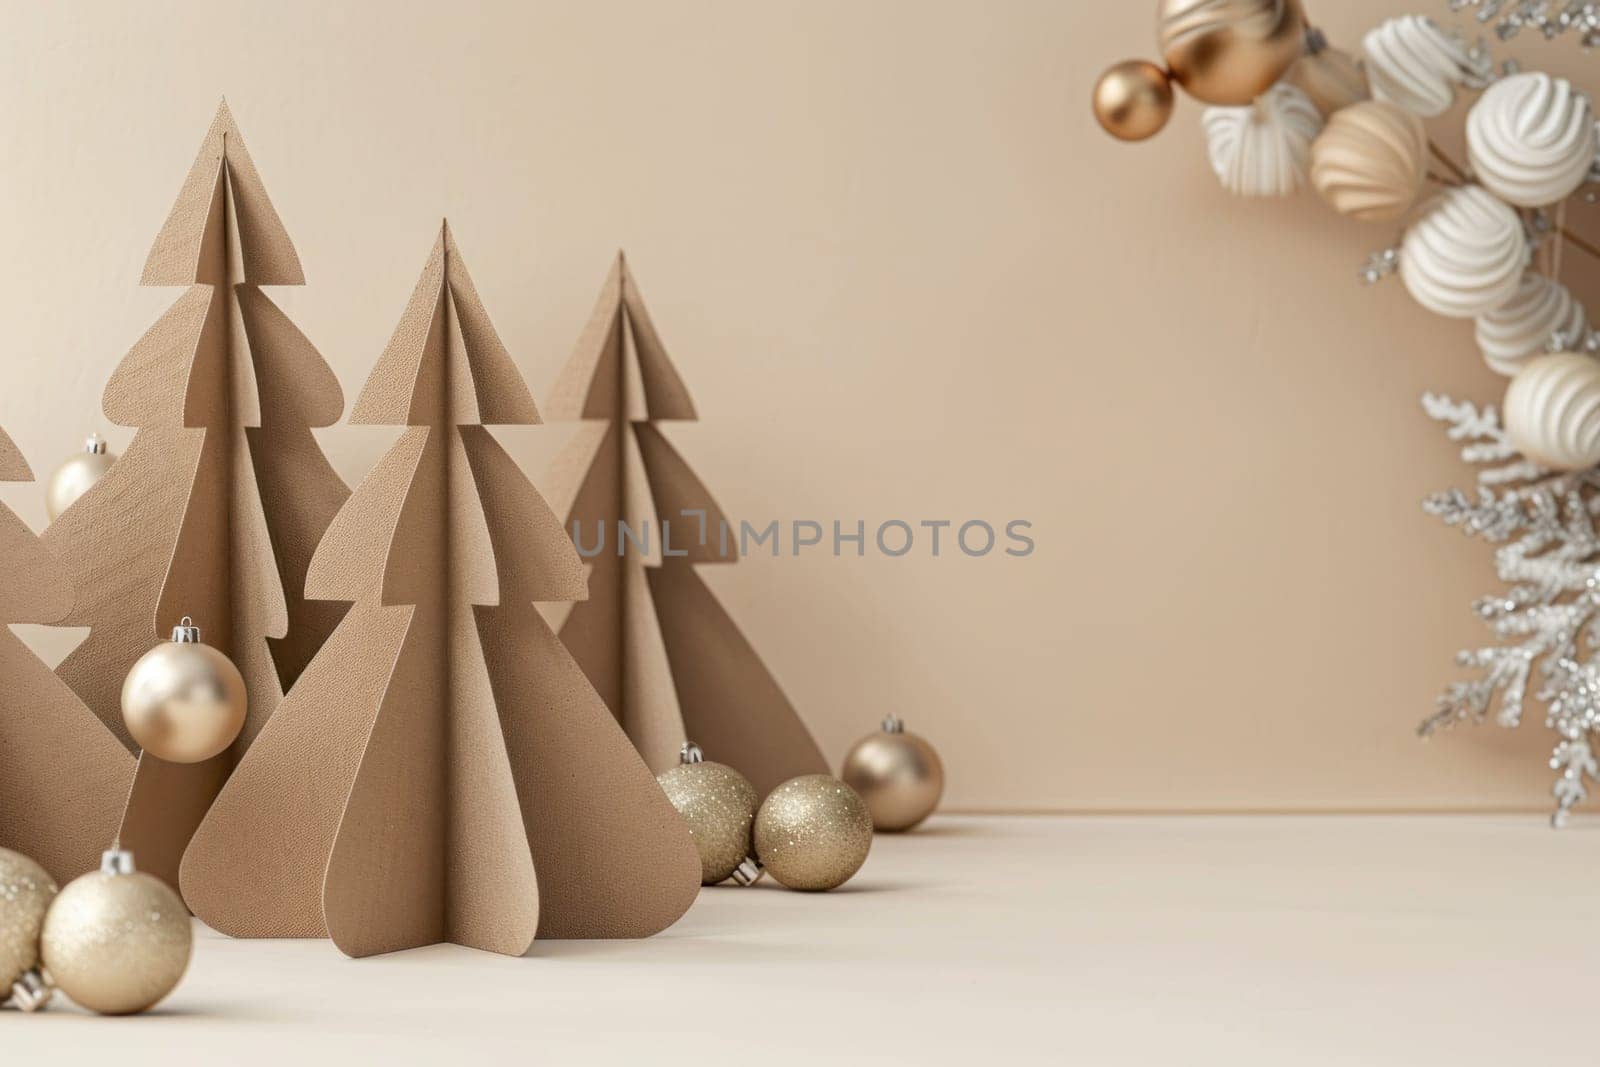 Cardboard christmas trees on beige background for holiday season decoration concept in 3d rendering by Vichizh